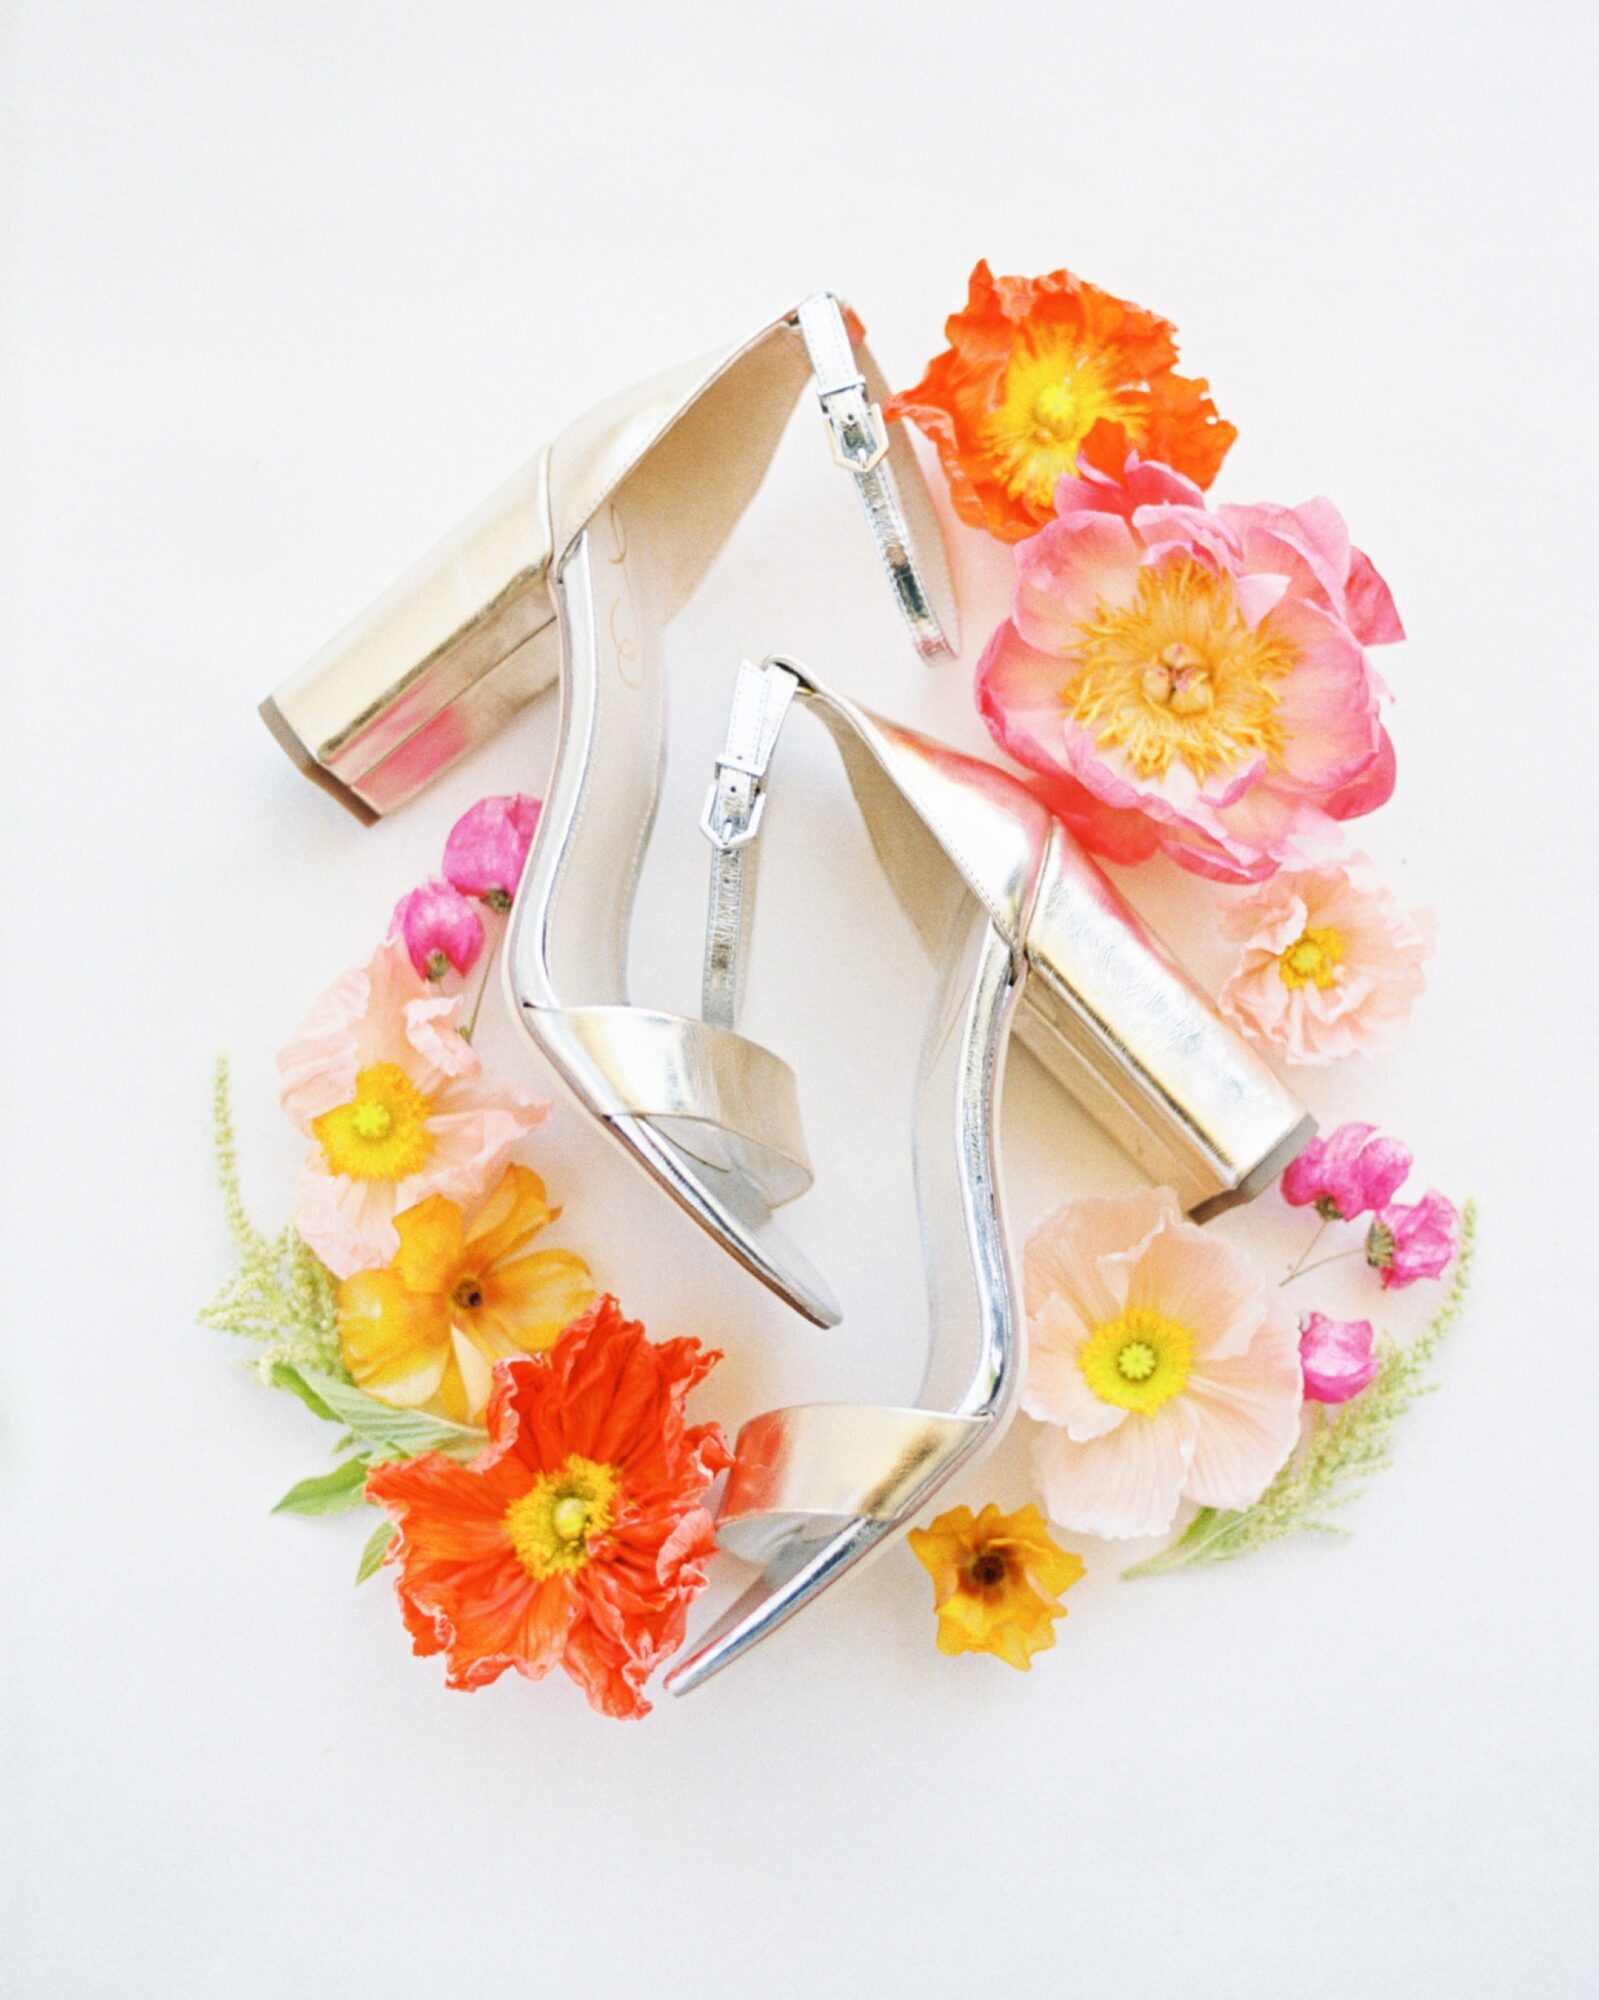 tropical florals decorating shoes at la lomita ranch in edna valley california by photographer Jessica Sofranko